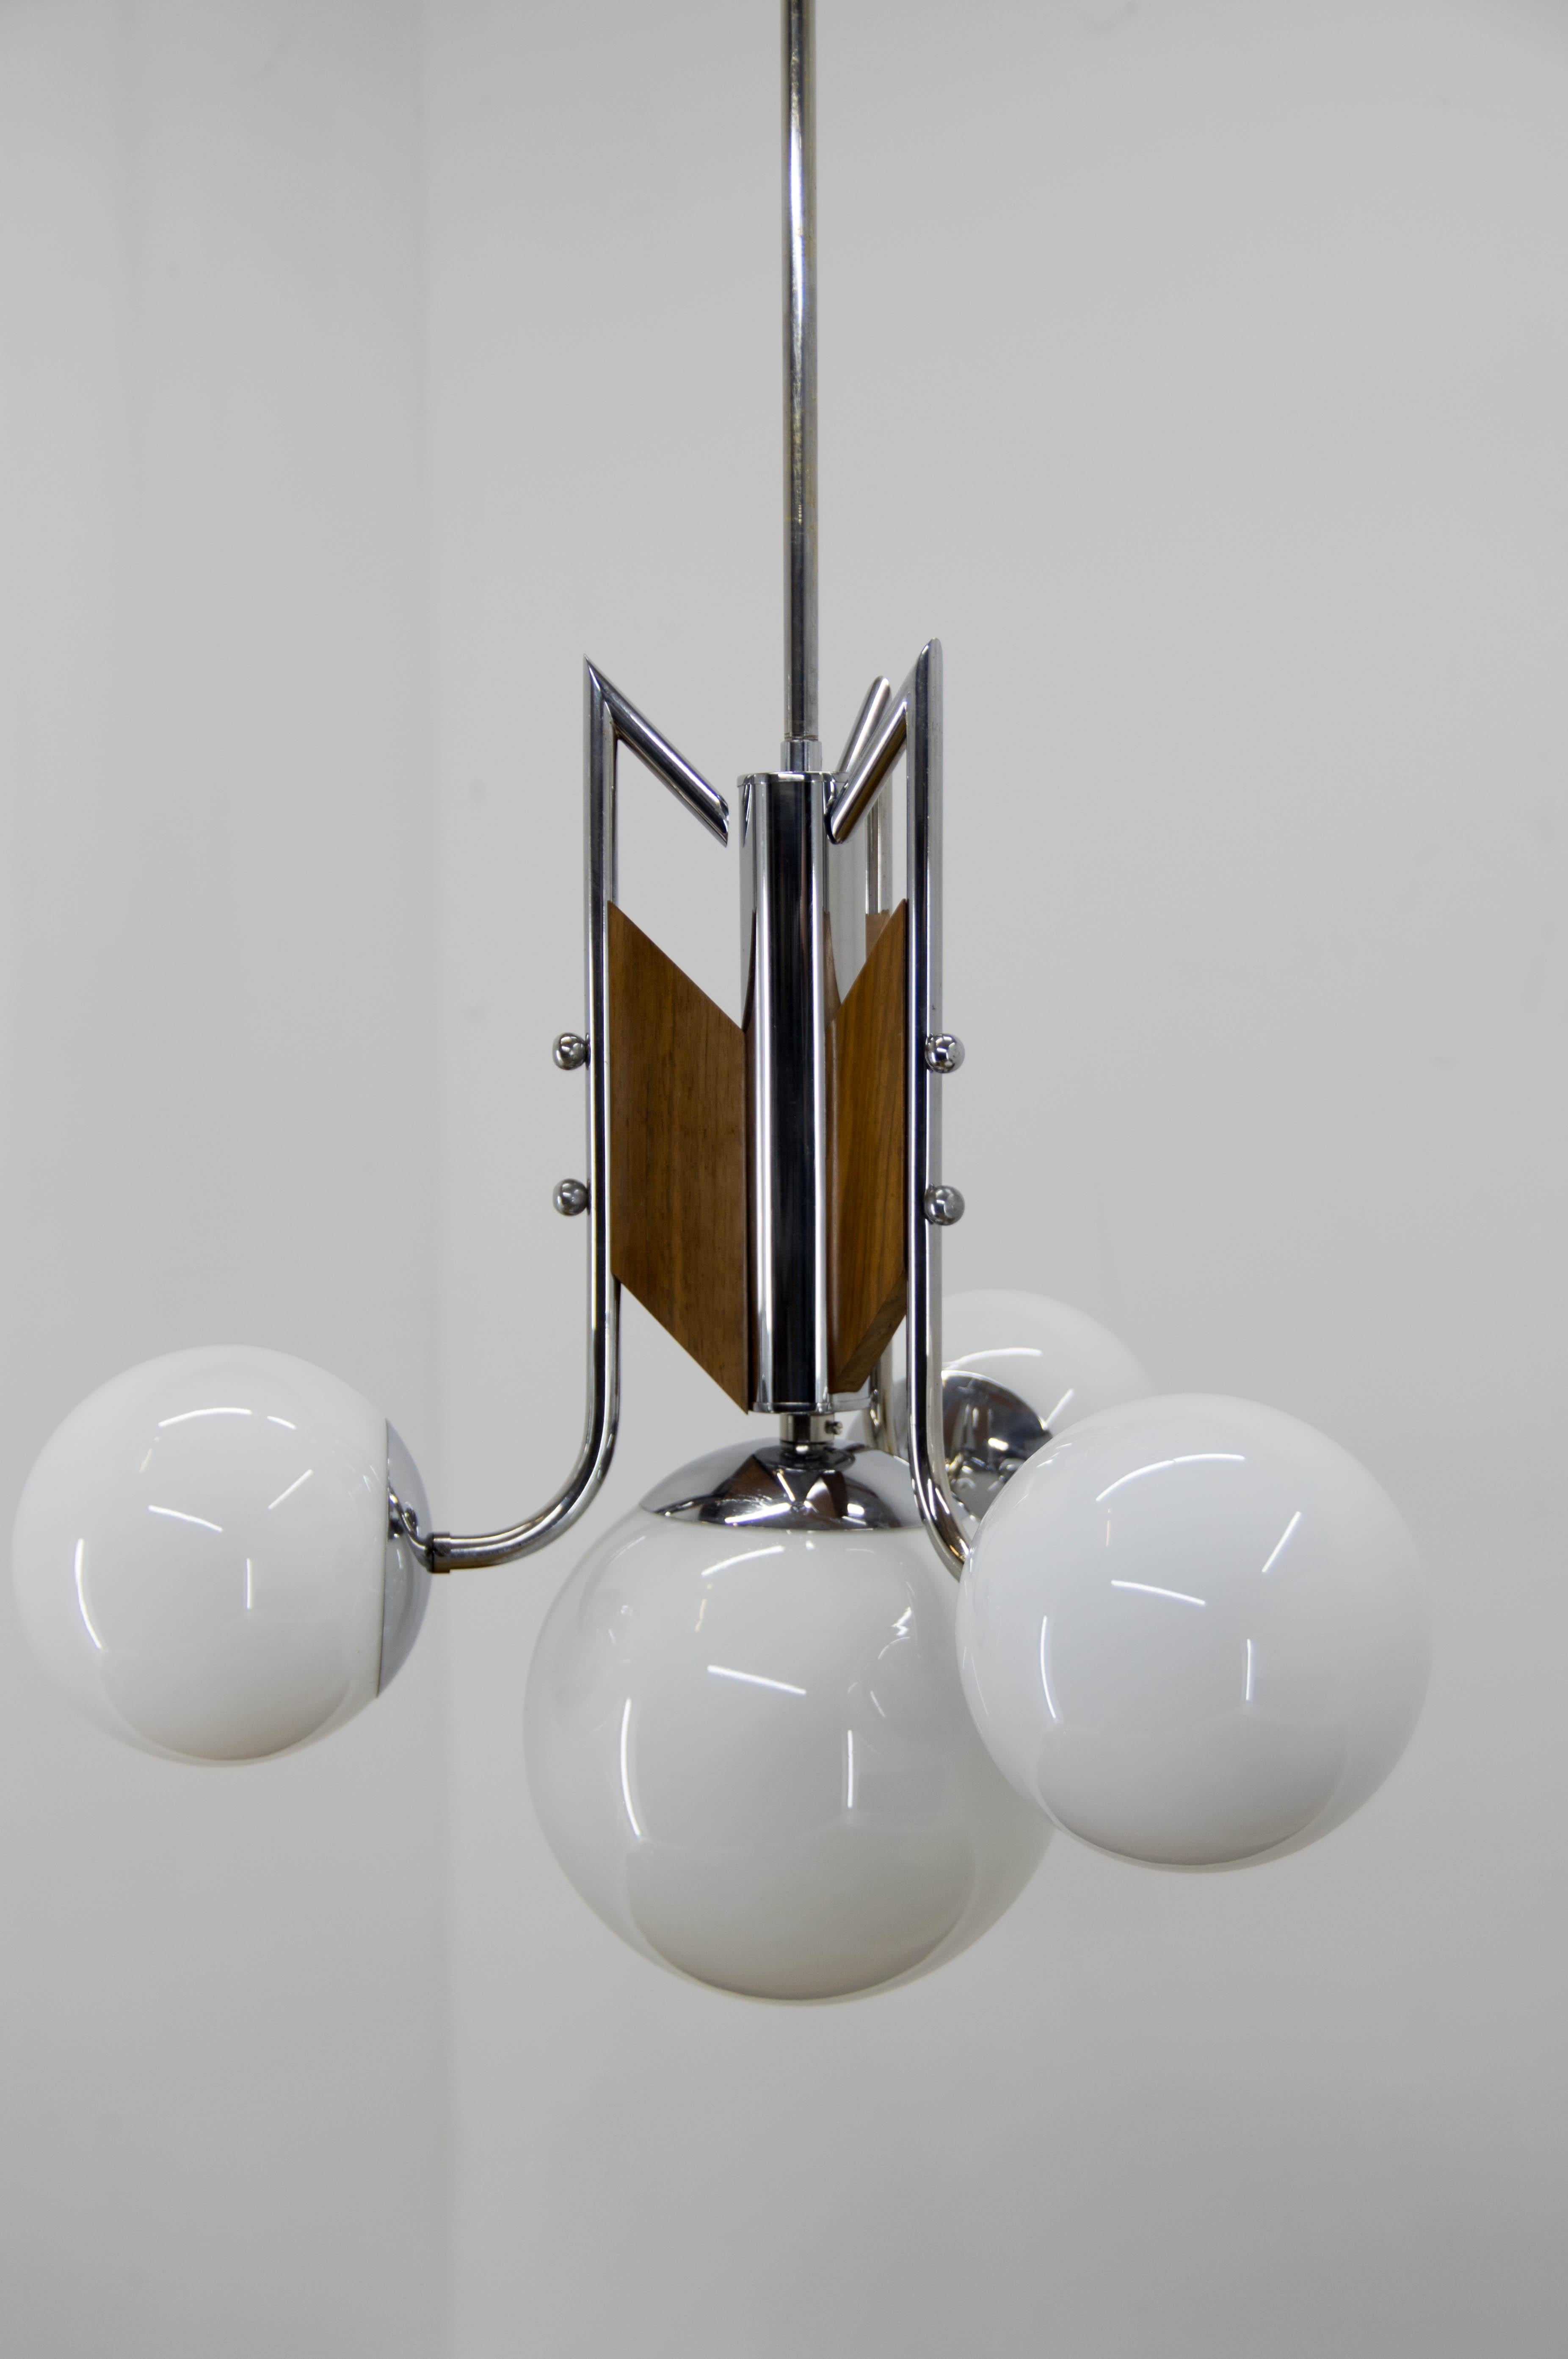 Unusual Functionalist chandelier made of chrome wood and opaline glass.
Restored - cleaned, polished, rewired:
two separate circuits: 3+1 E25-E27 bulbs
US wiring compatible.